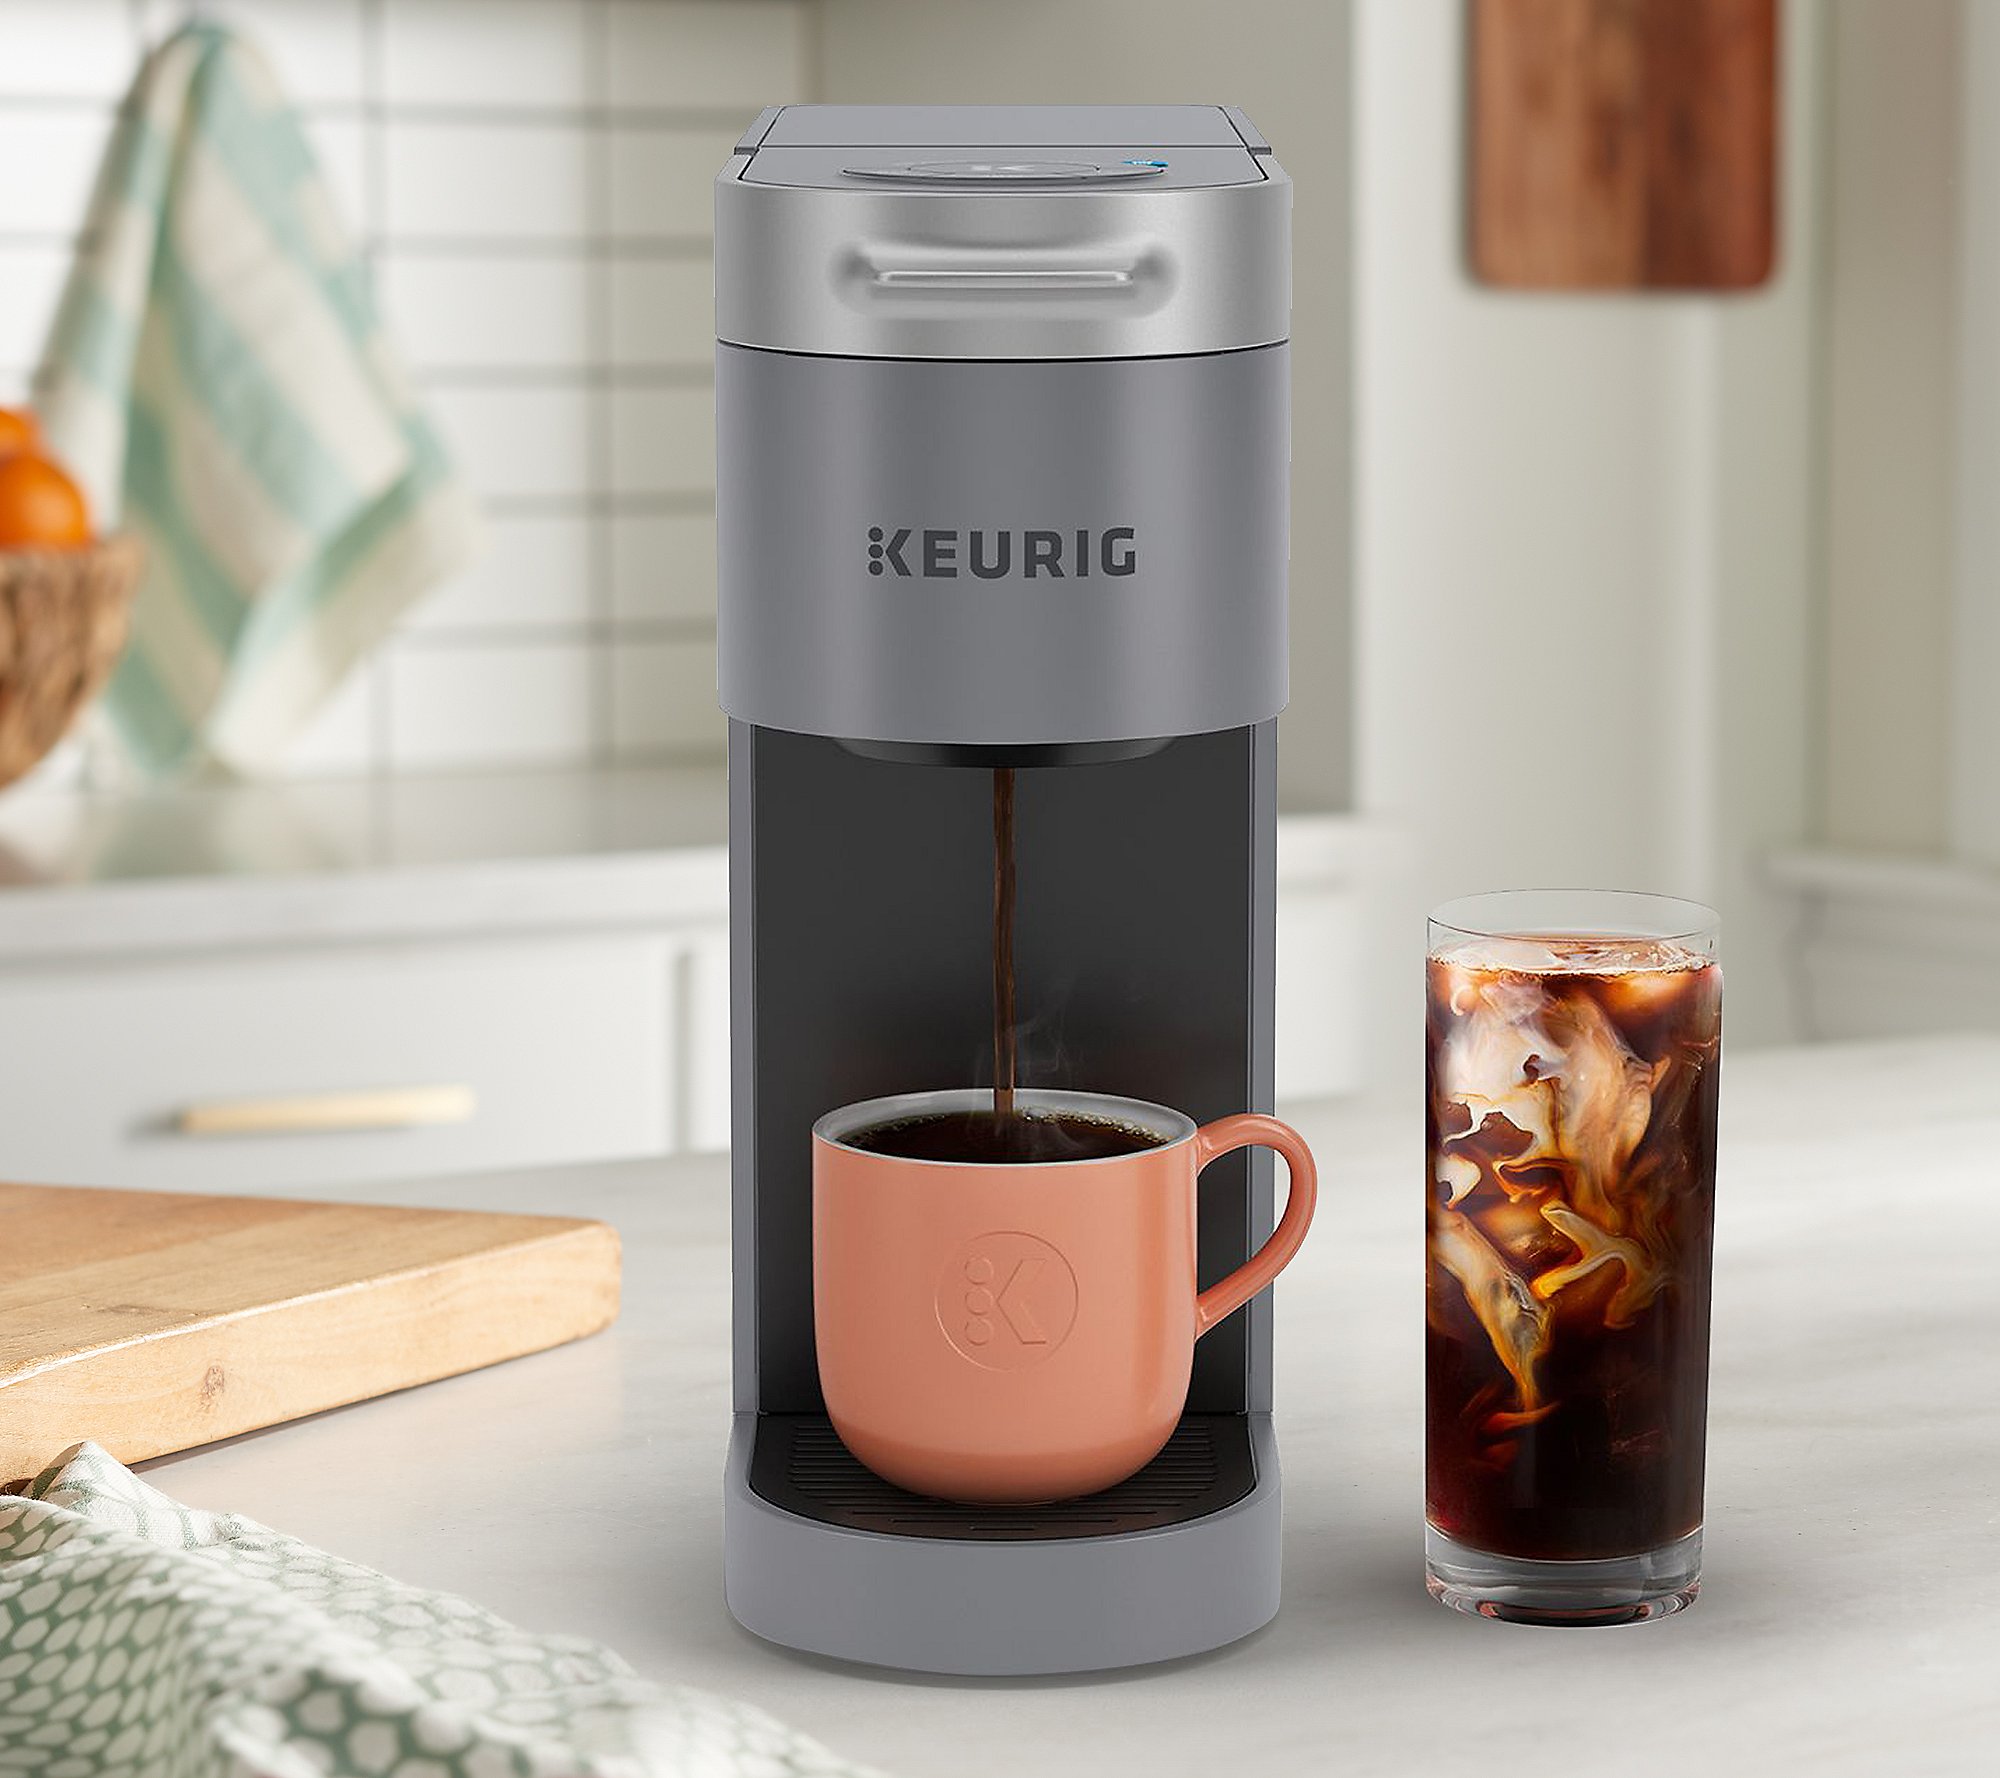 New QVC Customers: Keurig K-Slim + ICED Single Serve Coffee Brewer (Grey or Blue) $49.98 + Free Shipping